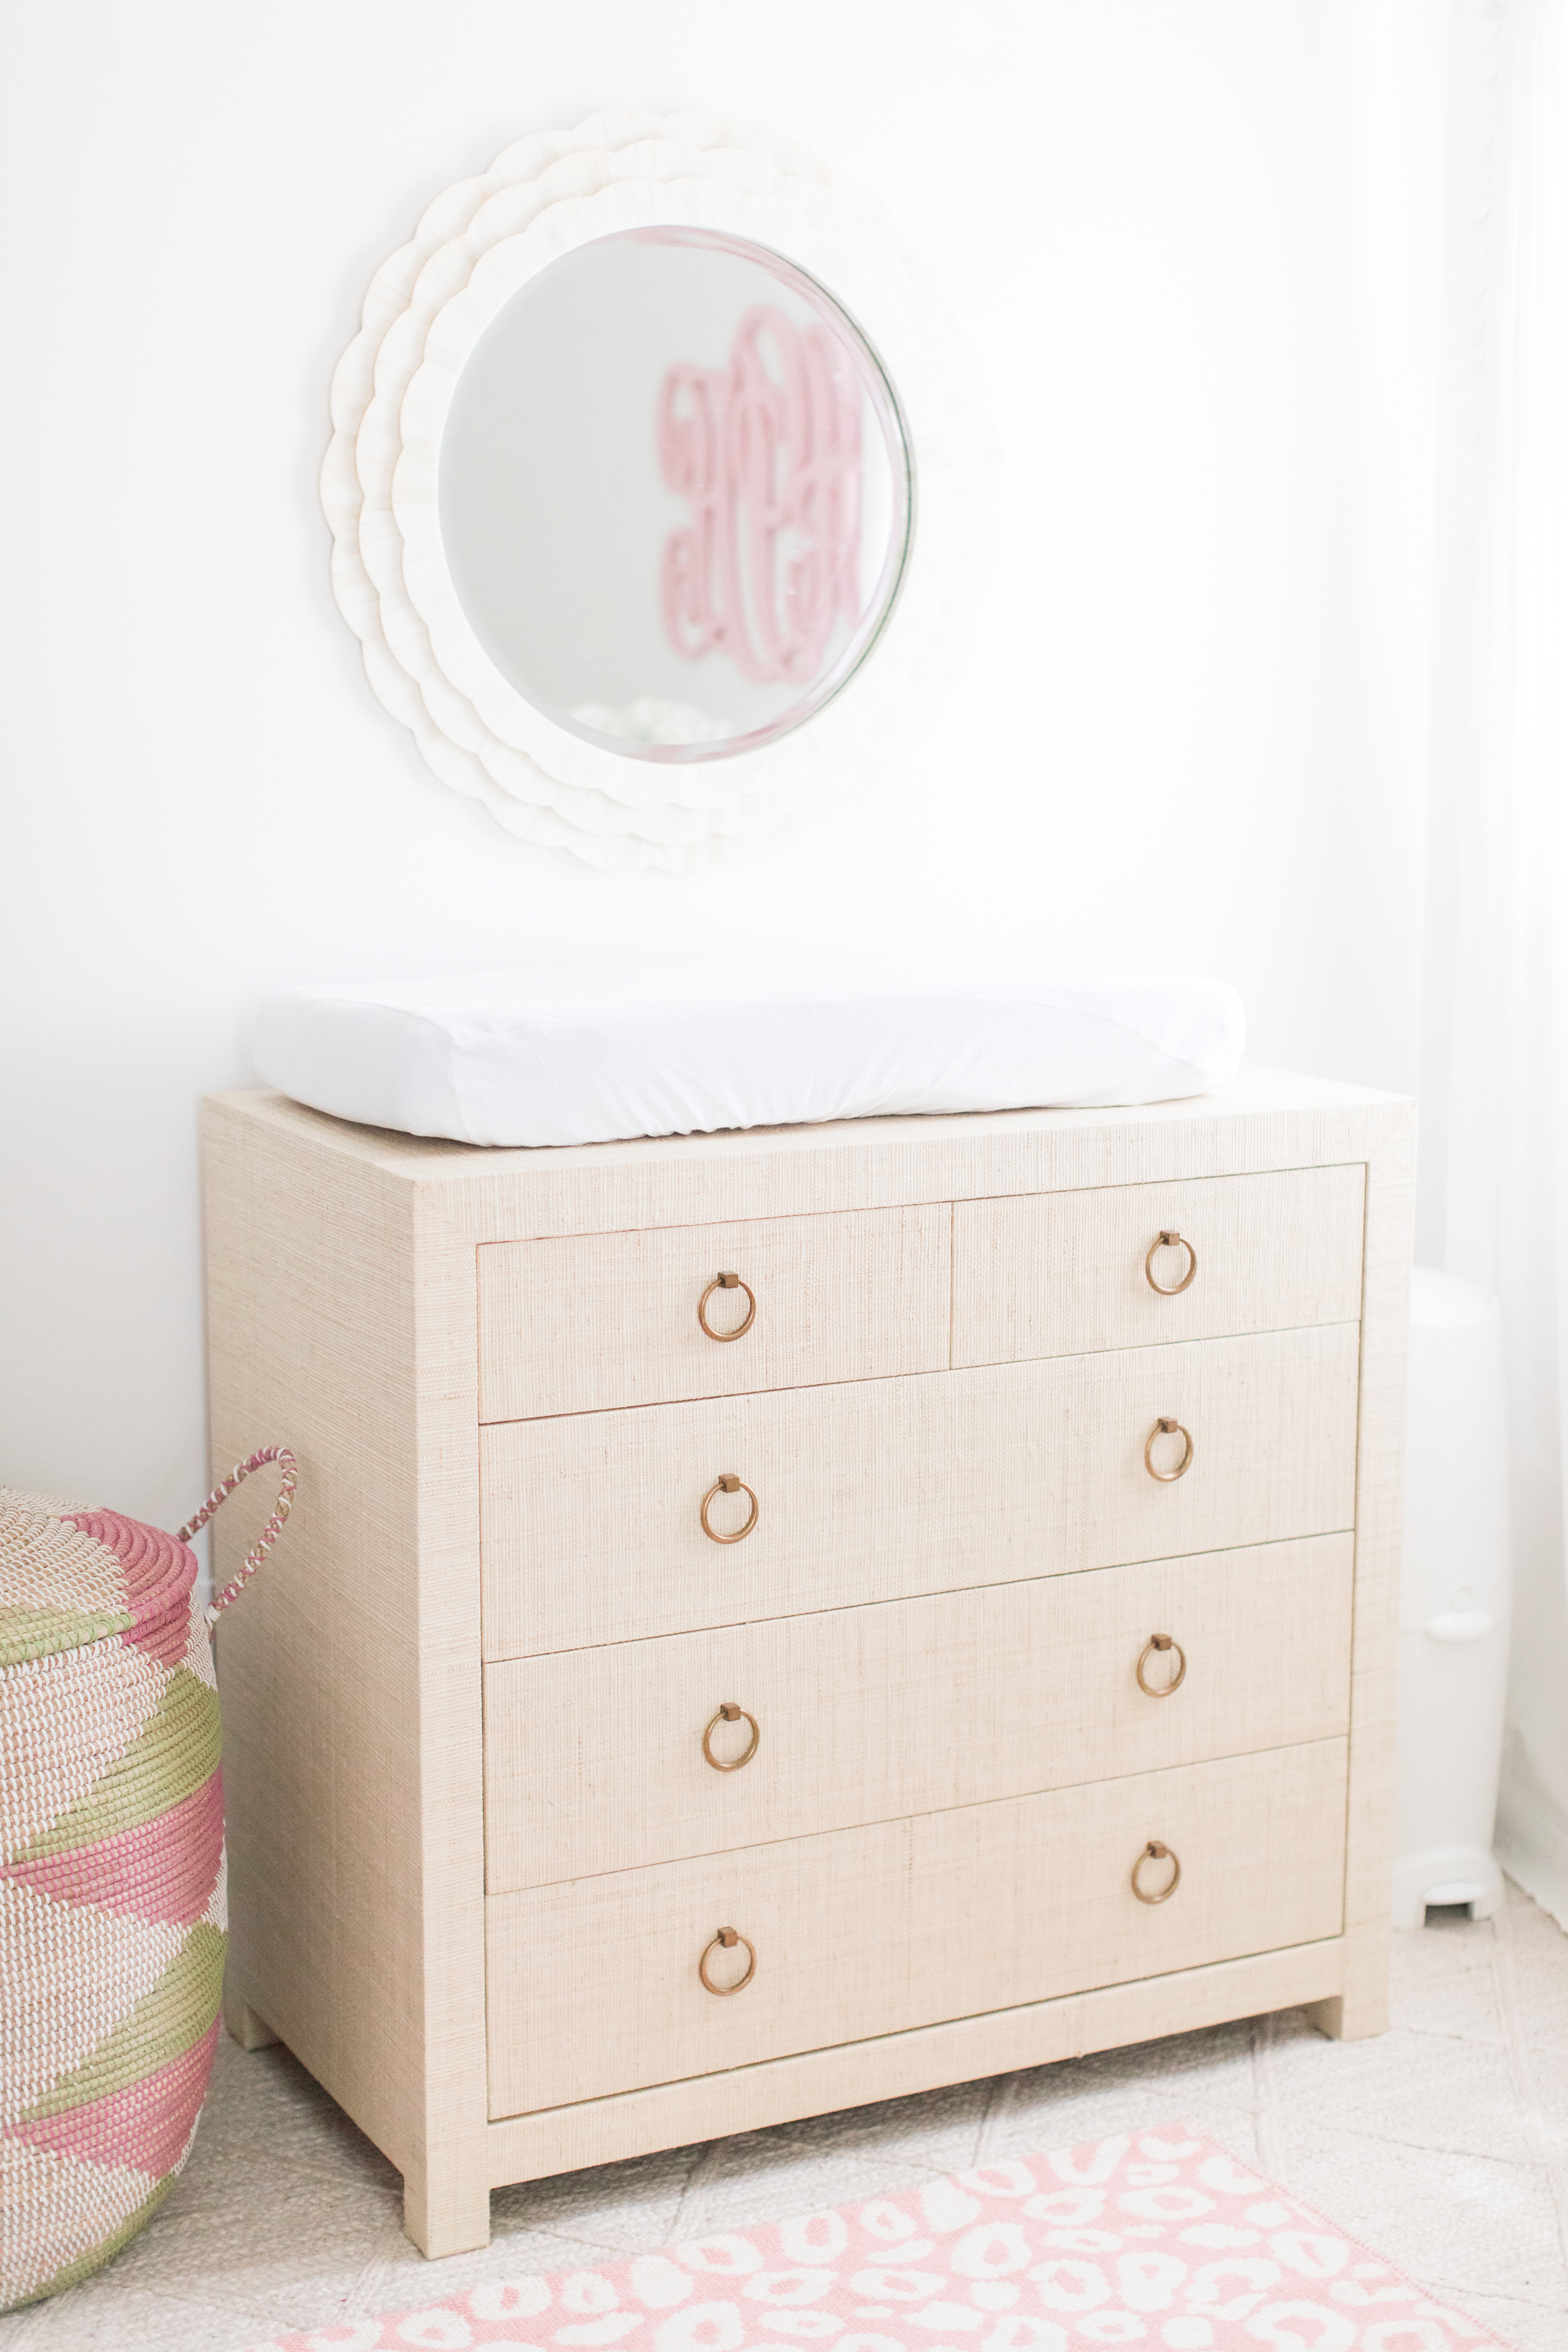 Grasscloth Dresser in Pink and Gray Nursery - Project Nursery